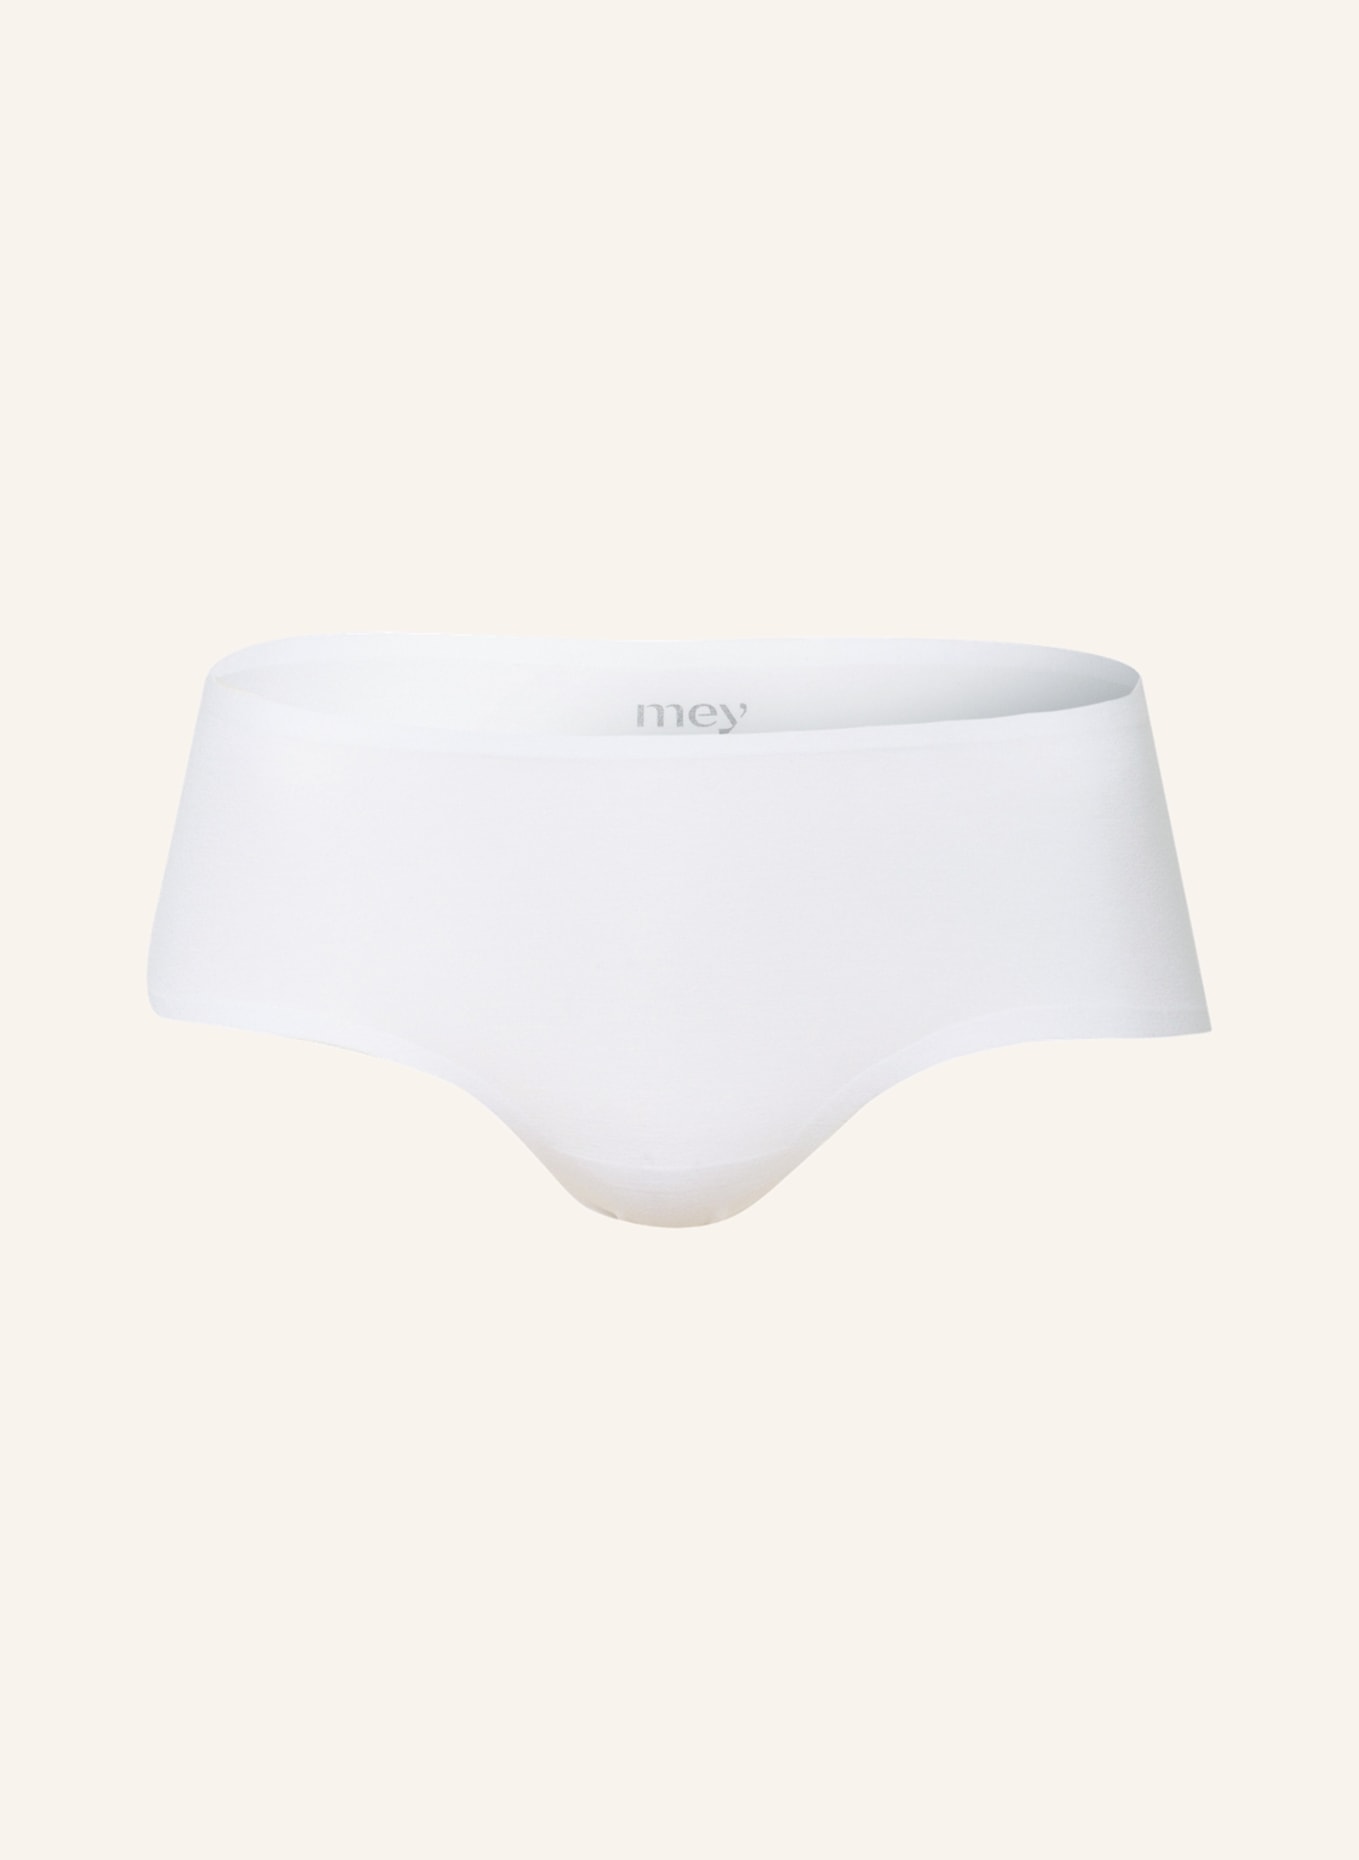 mey Panty series PURE SECOND ME in white